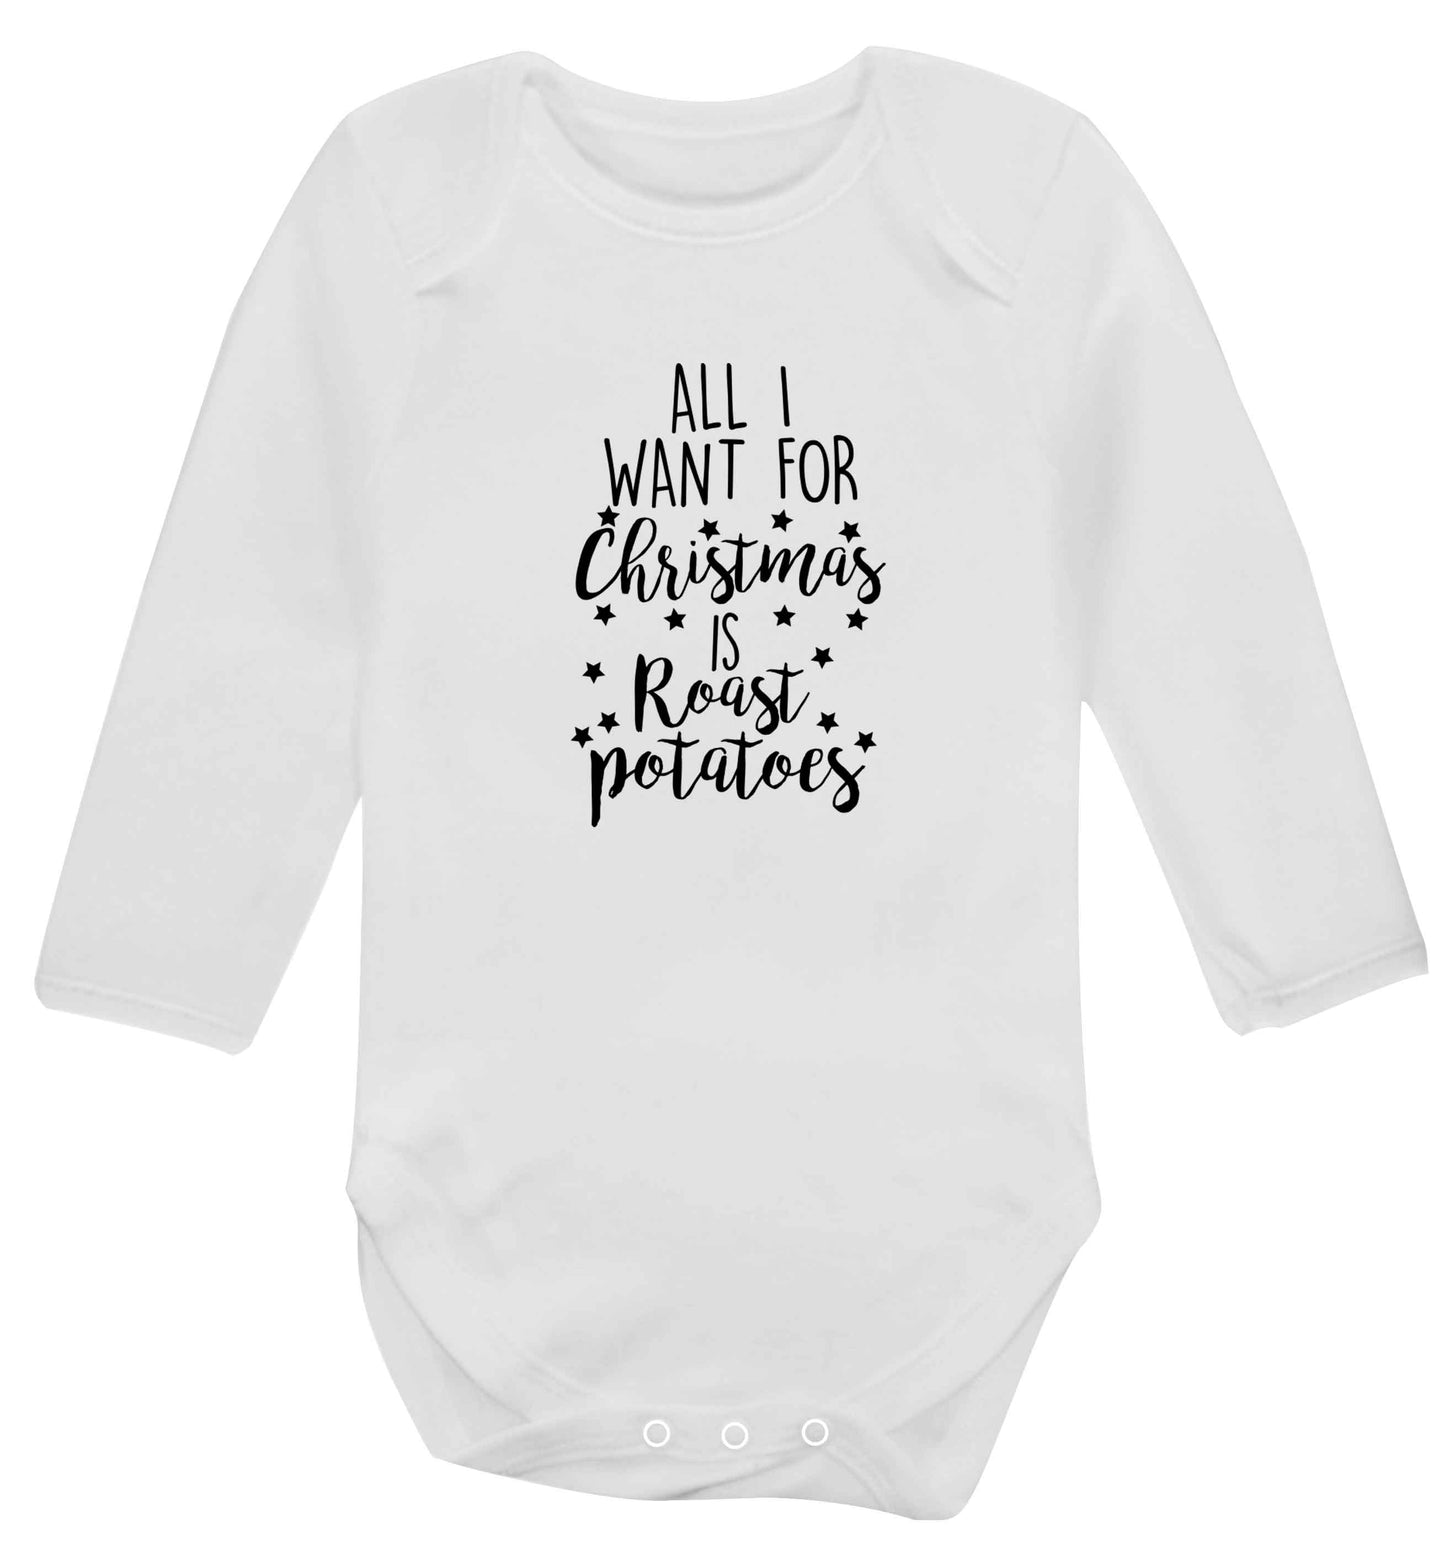 All I want for Christmas is roast potatoes baby vest long sleeved white 6-12 months